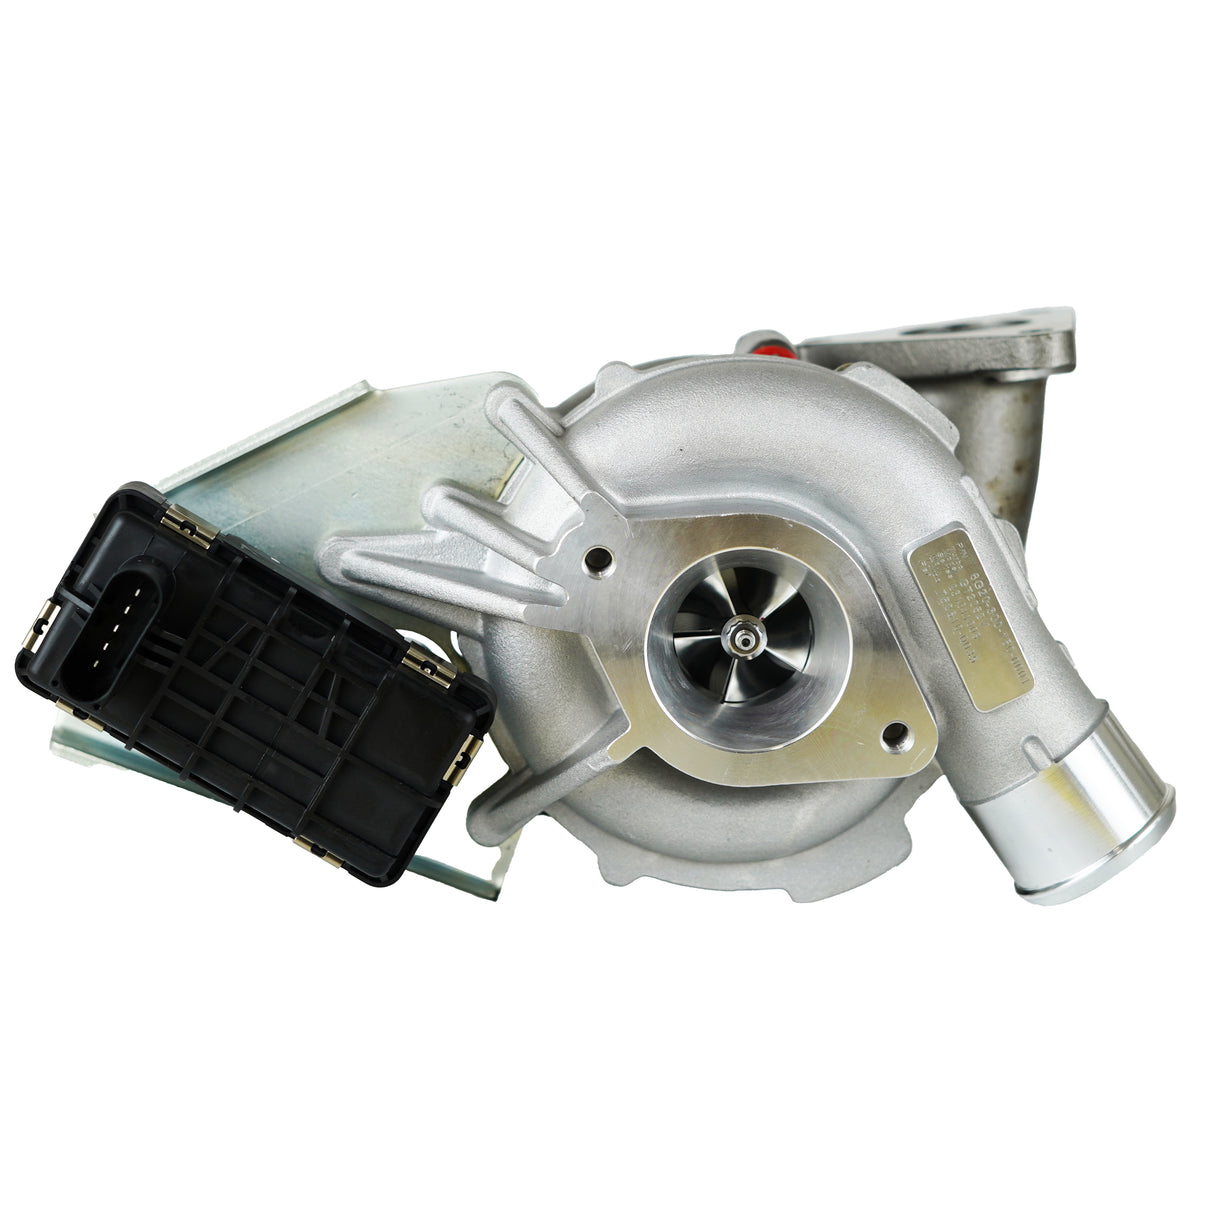 CCT Stage1 GTA2052V Turbo Charger To Suit Ford Transit / Land Rover Defender 2.4L 752610